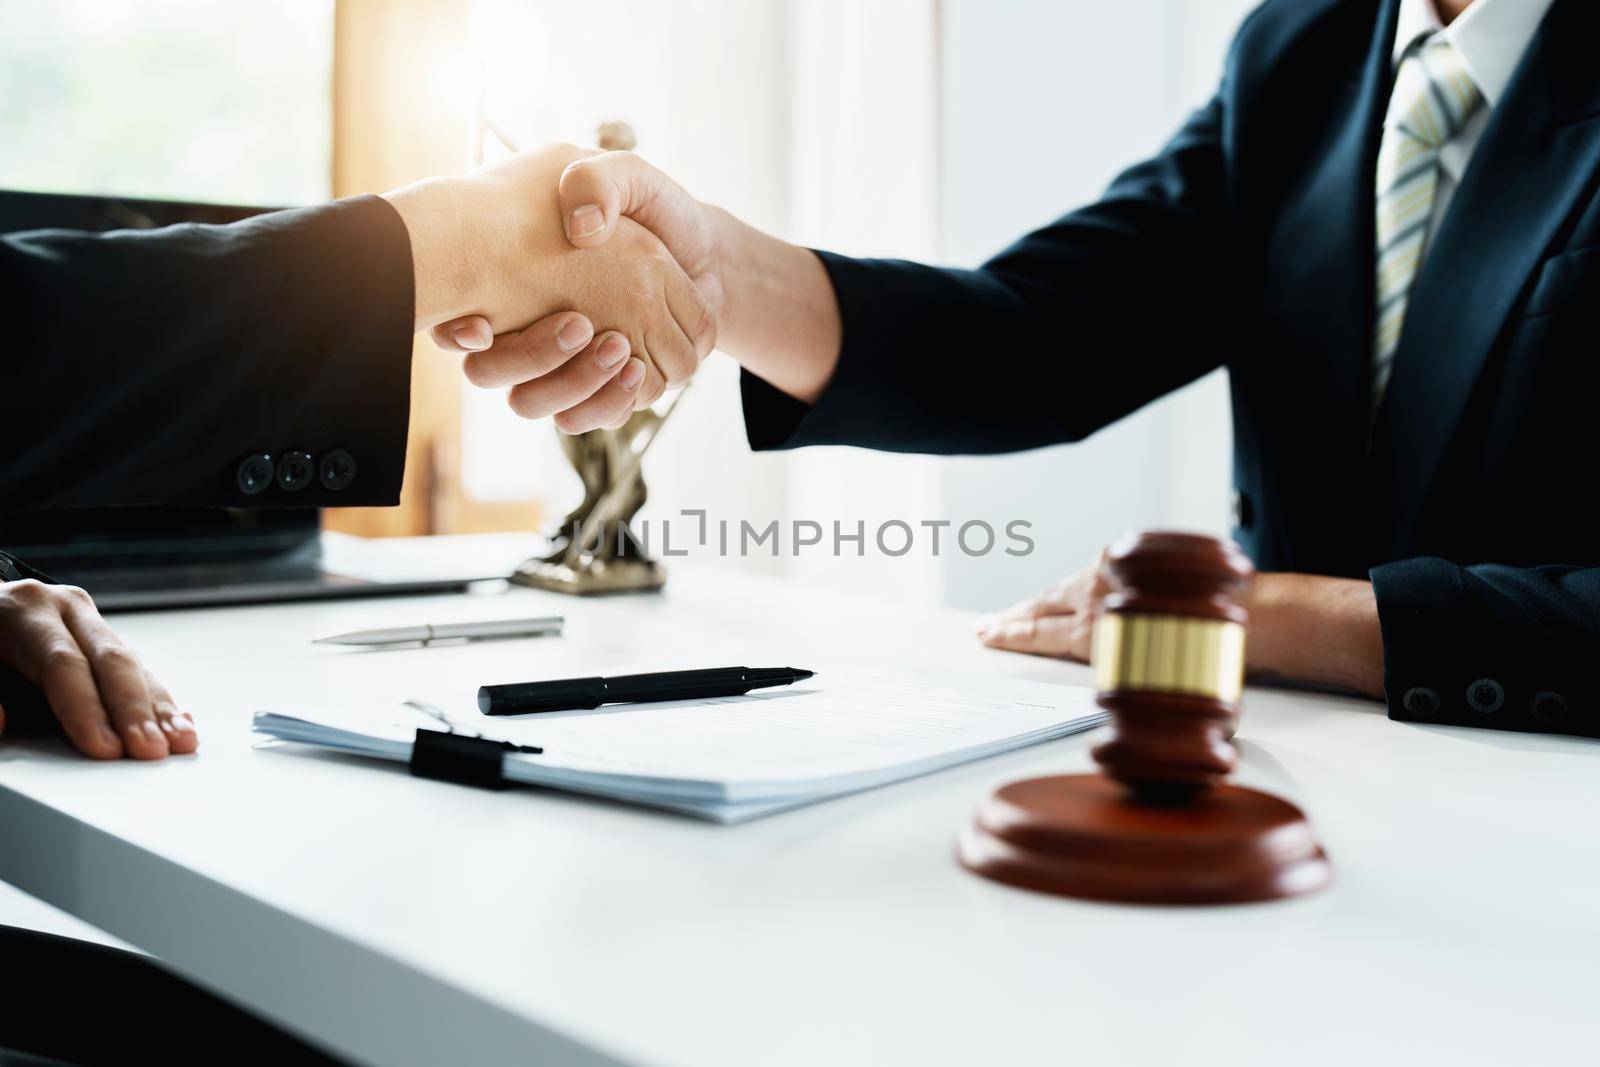 Law, consultation, agreement, contract, lawyer or attorney shakes hands to agree on the client's offer to be hired to fight the parties in court